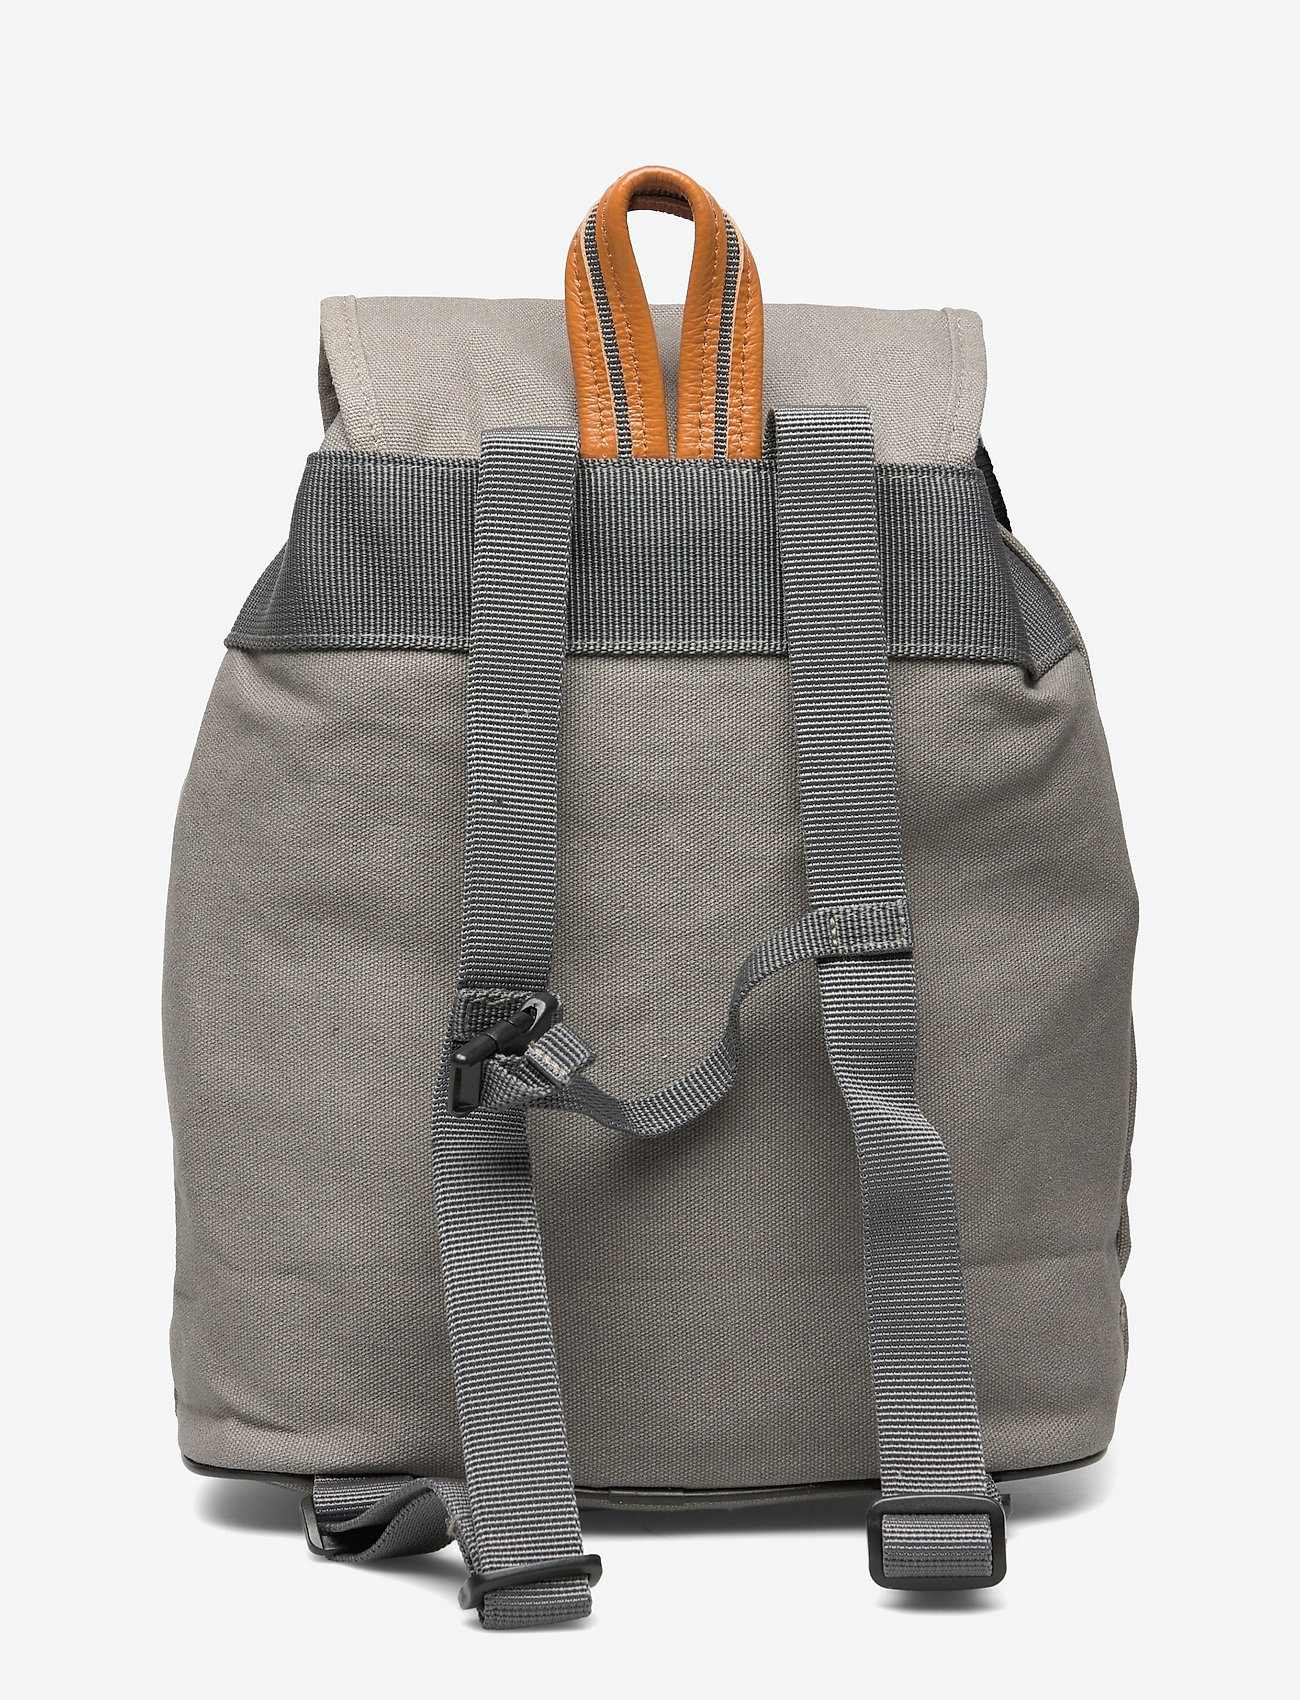 Smallstuff - Baggy back Pack, grey with leather Star - sommerschnäppchen - grey - 1